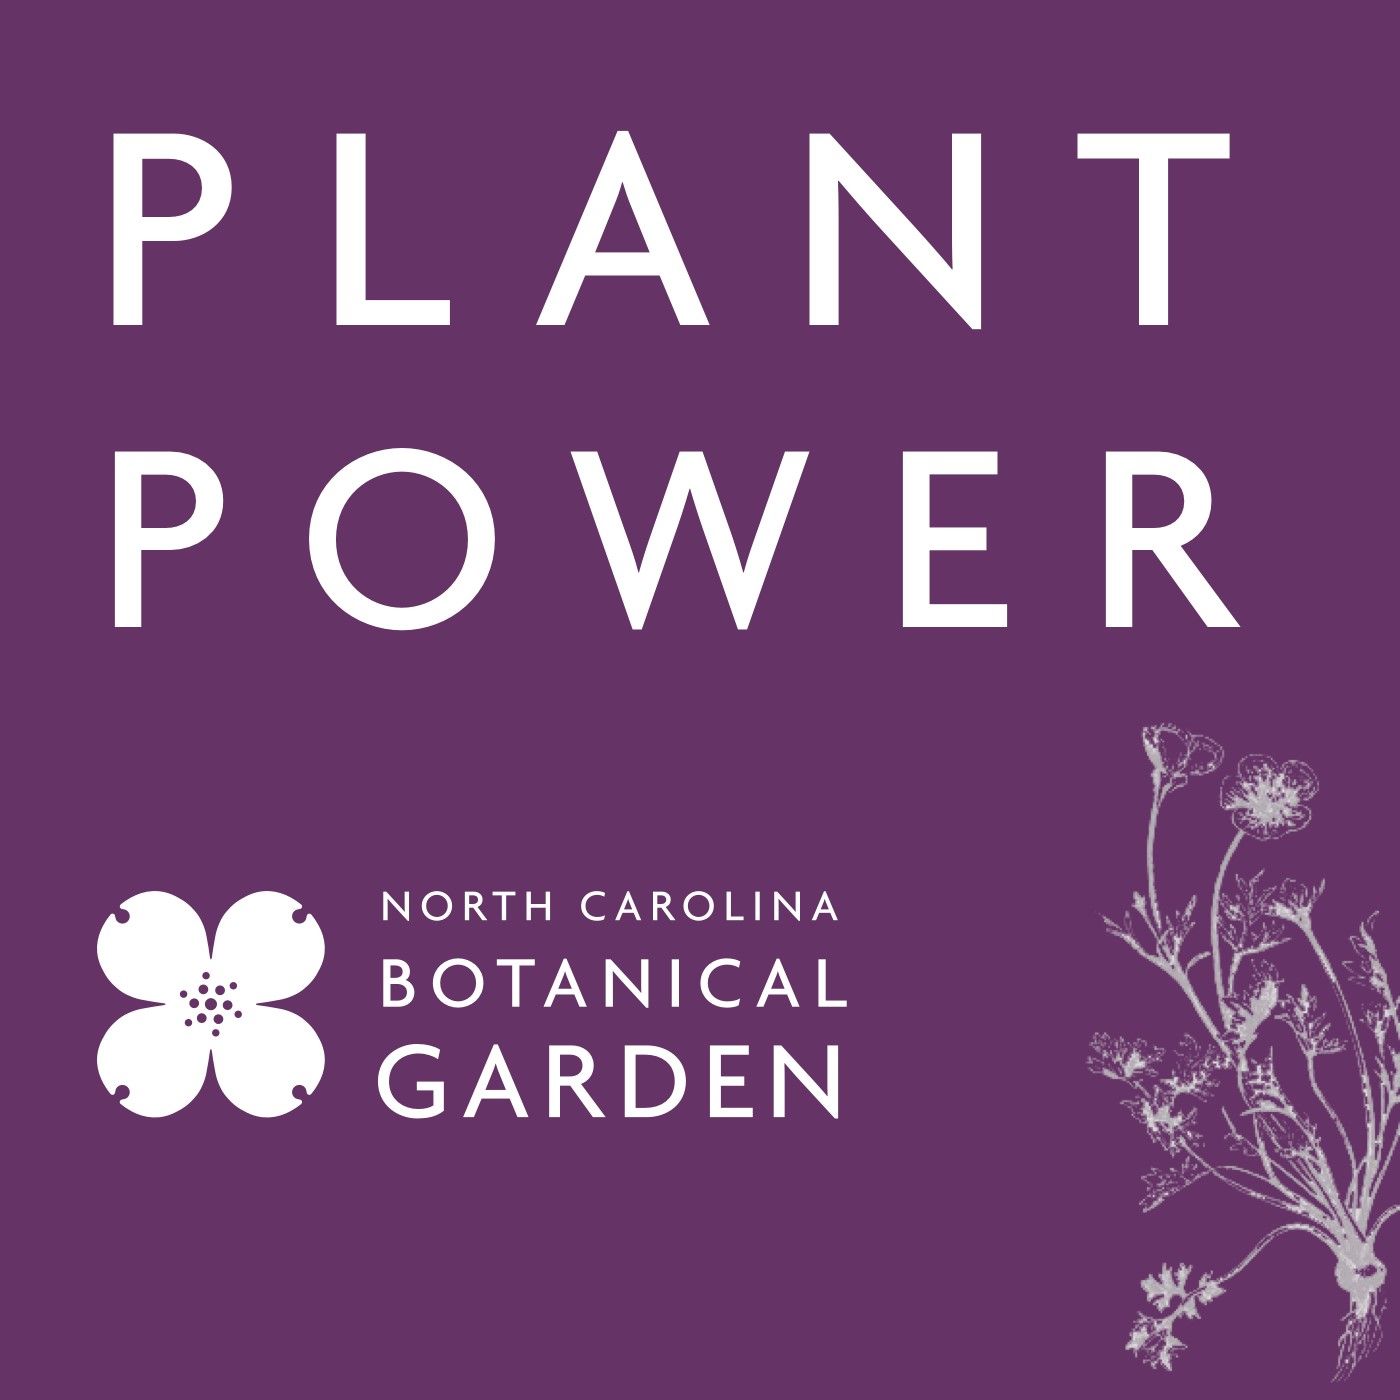 Plant Power: The Power of Plants in a Changing Climate